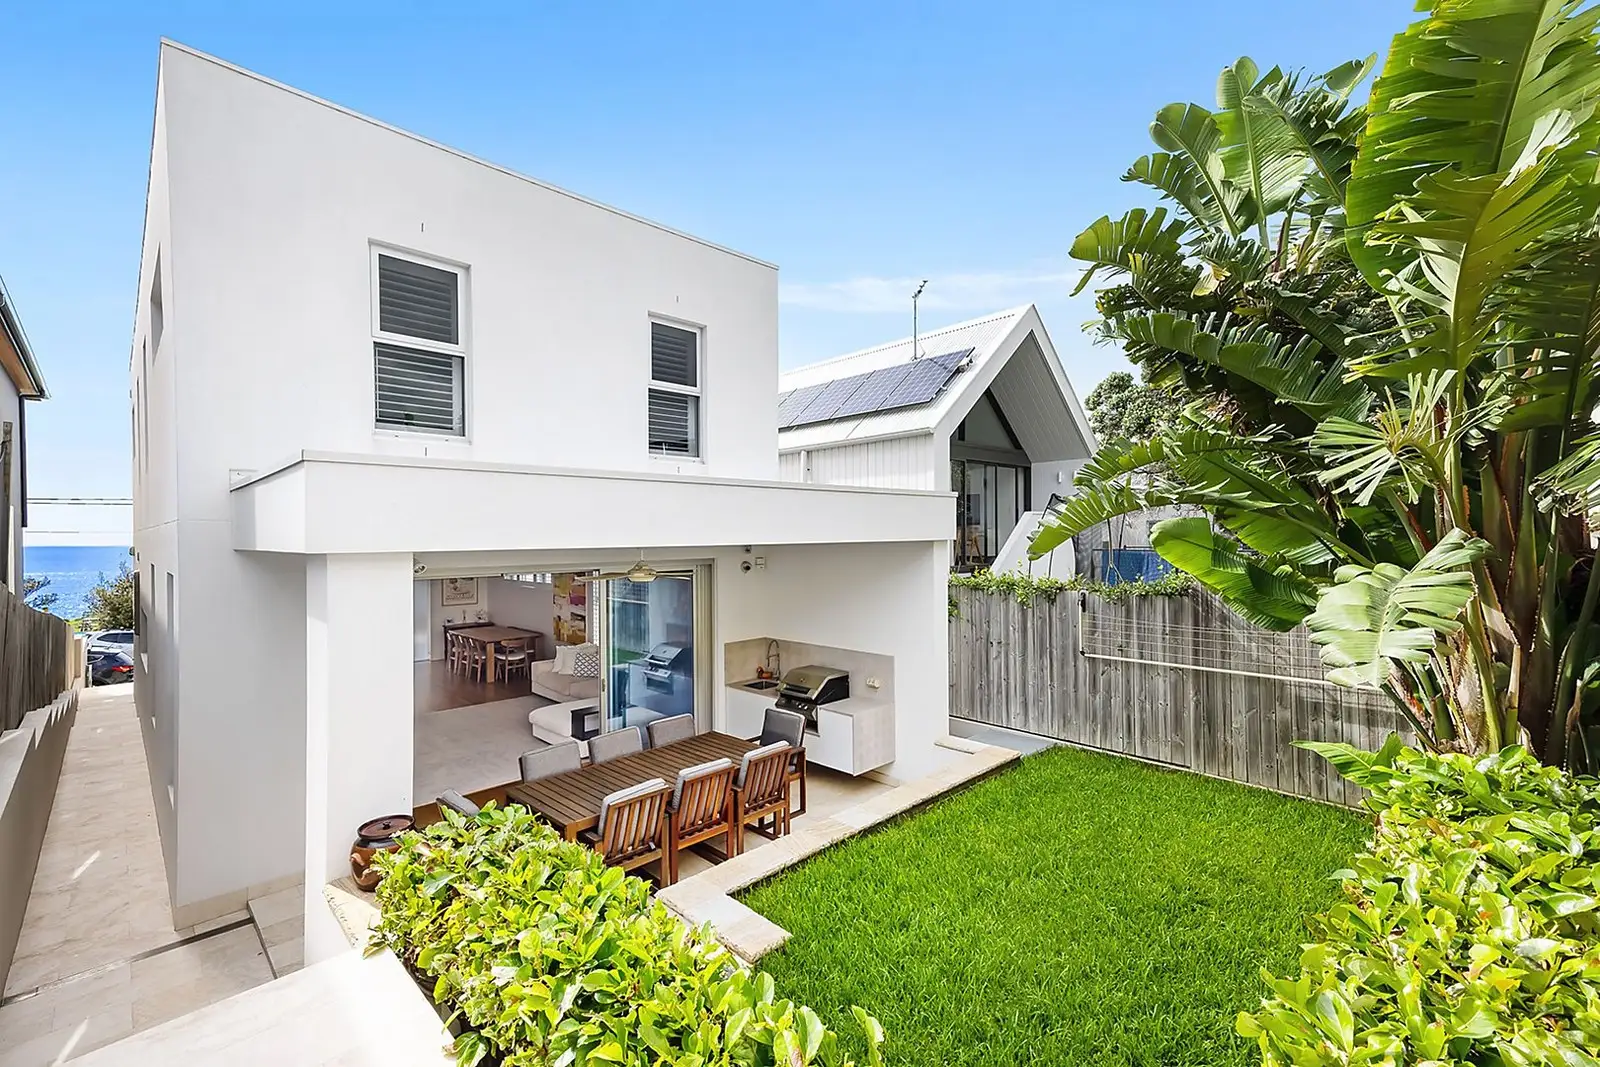 Photo #2: 14 Ocean Street, Clovelly - Sold by Sydney Sotheby's International Realty